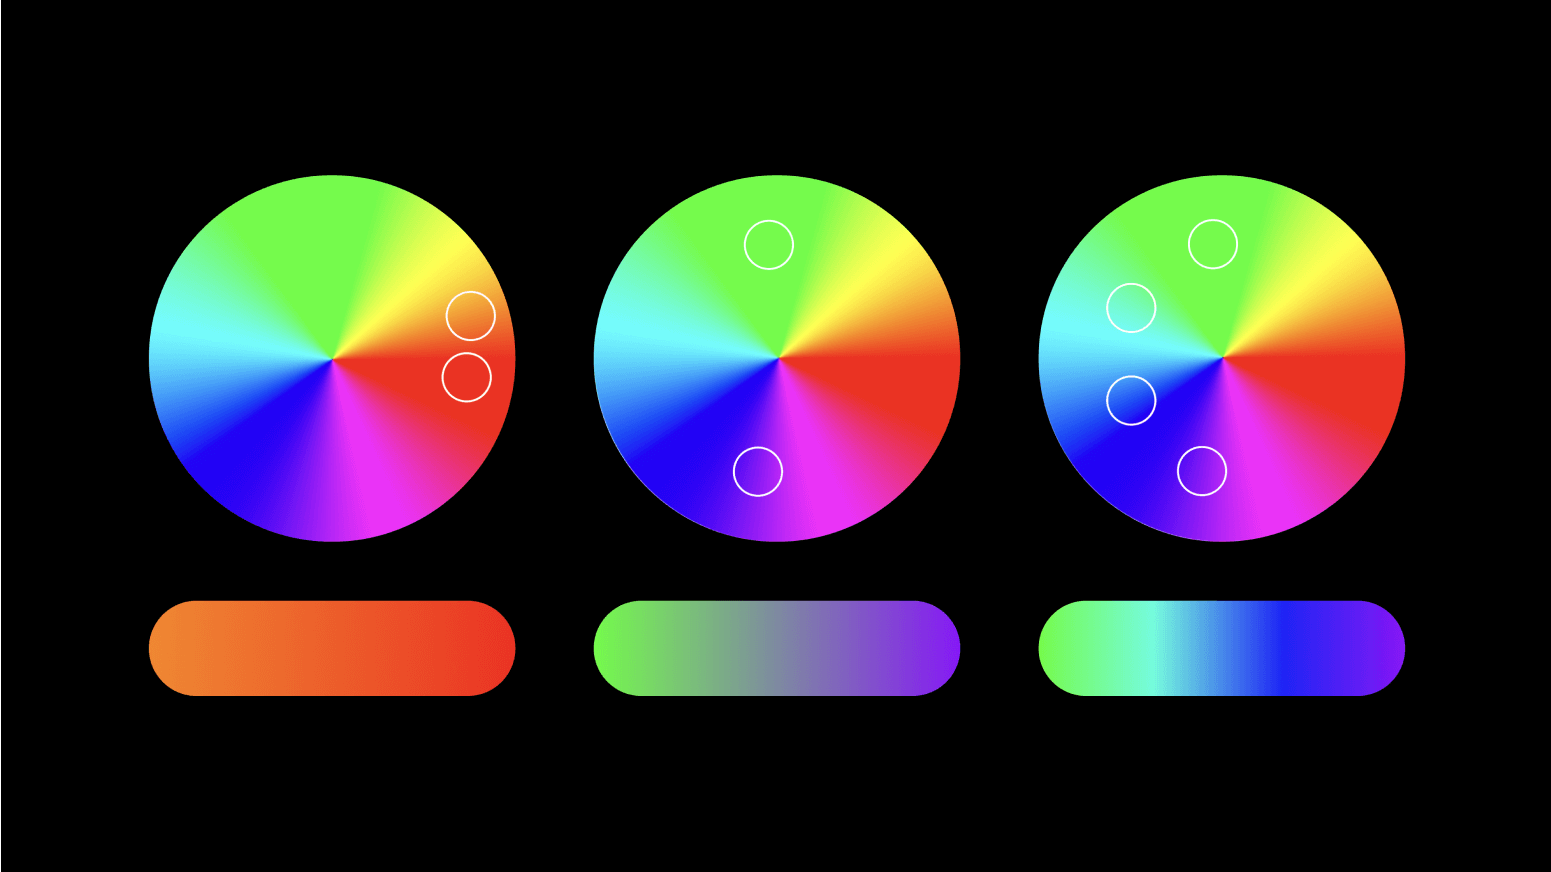 gradients from the color wheel